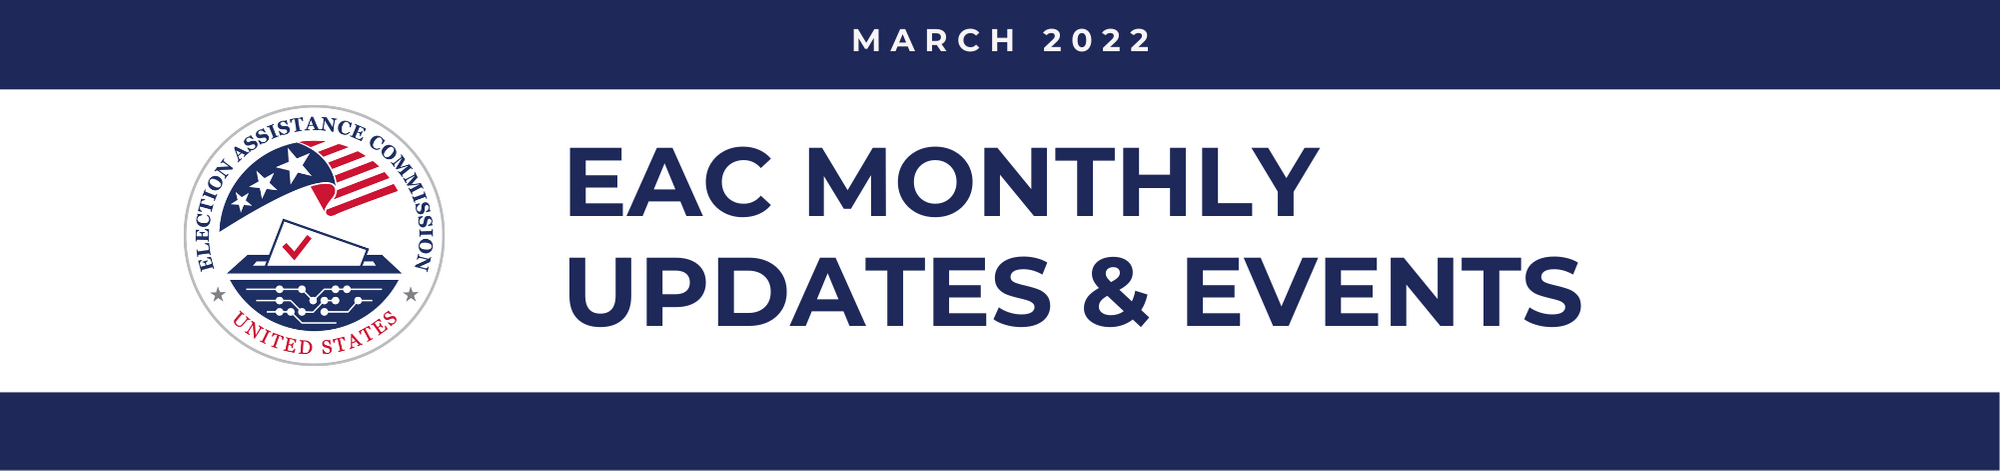 March 2022 EAC Monthly Updates & Events